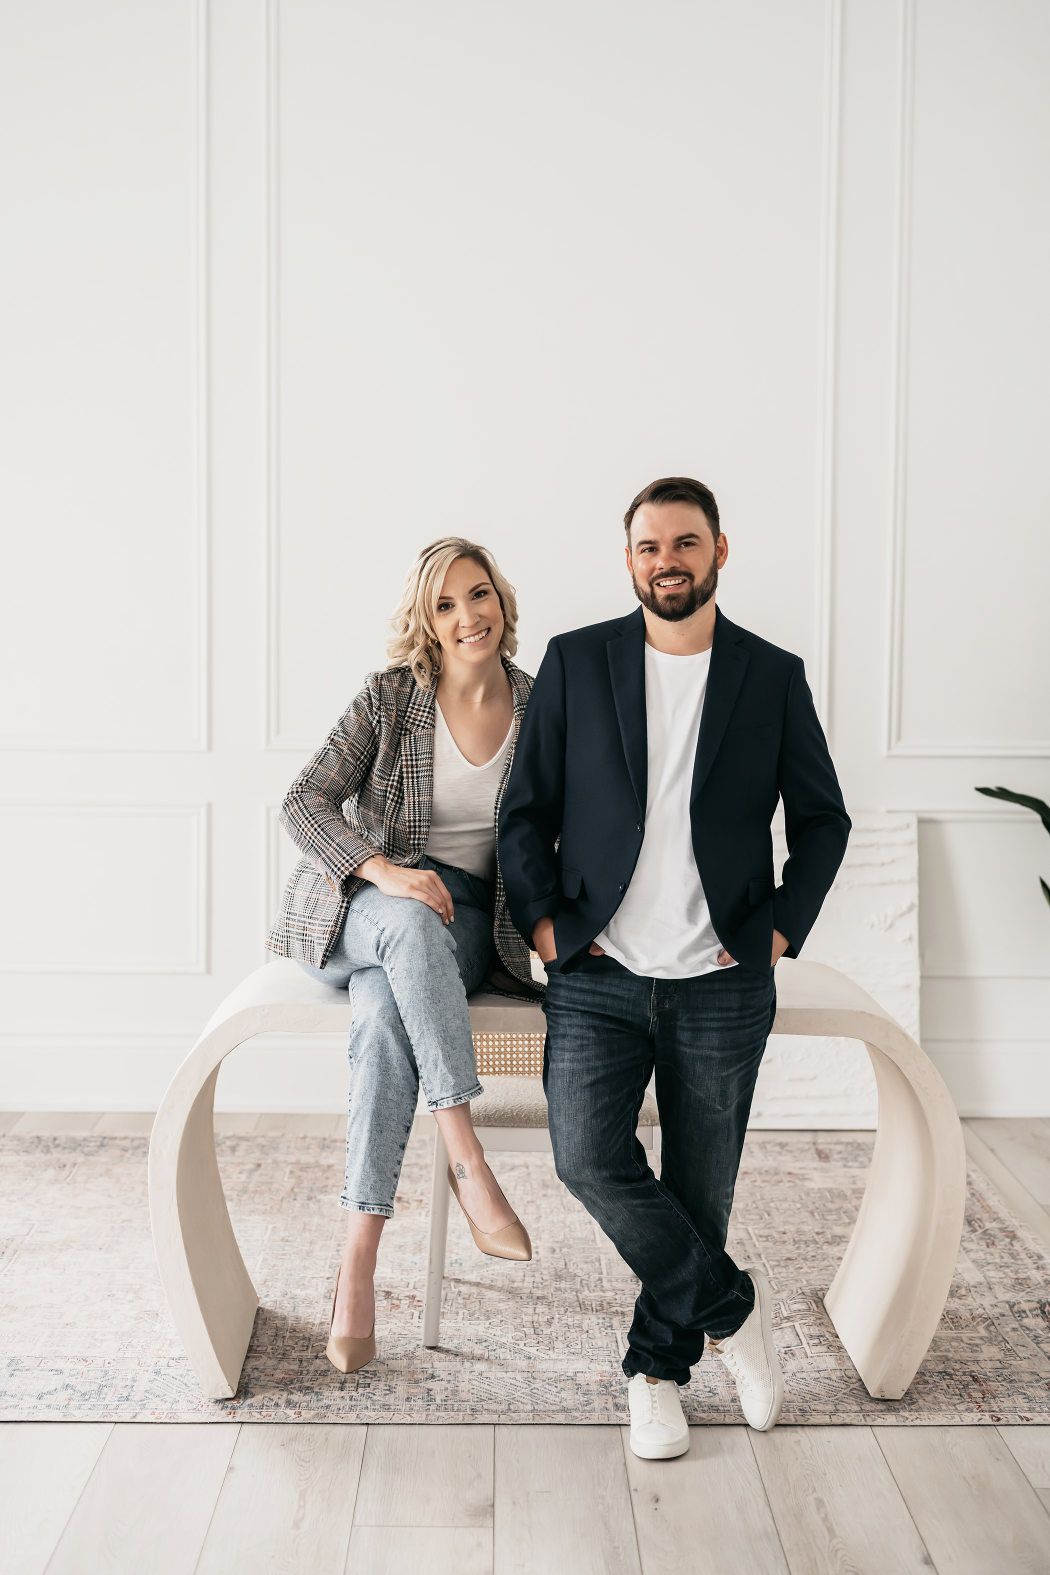 A man and woman posing on a bench during a branding photoshoot in a white room.